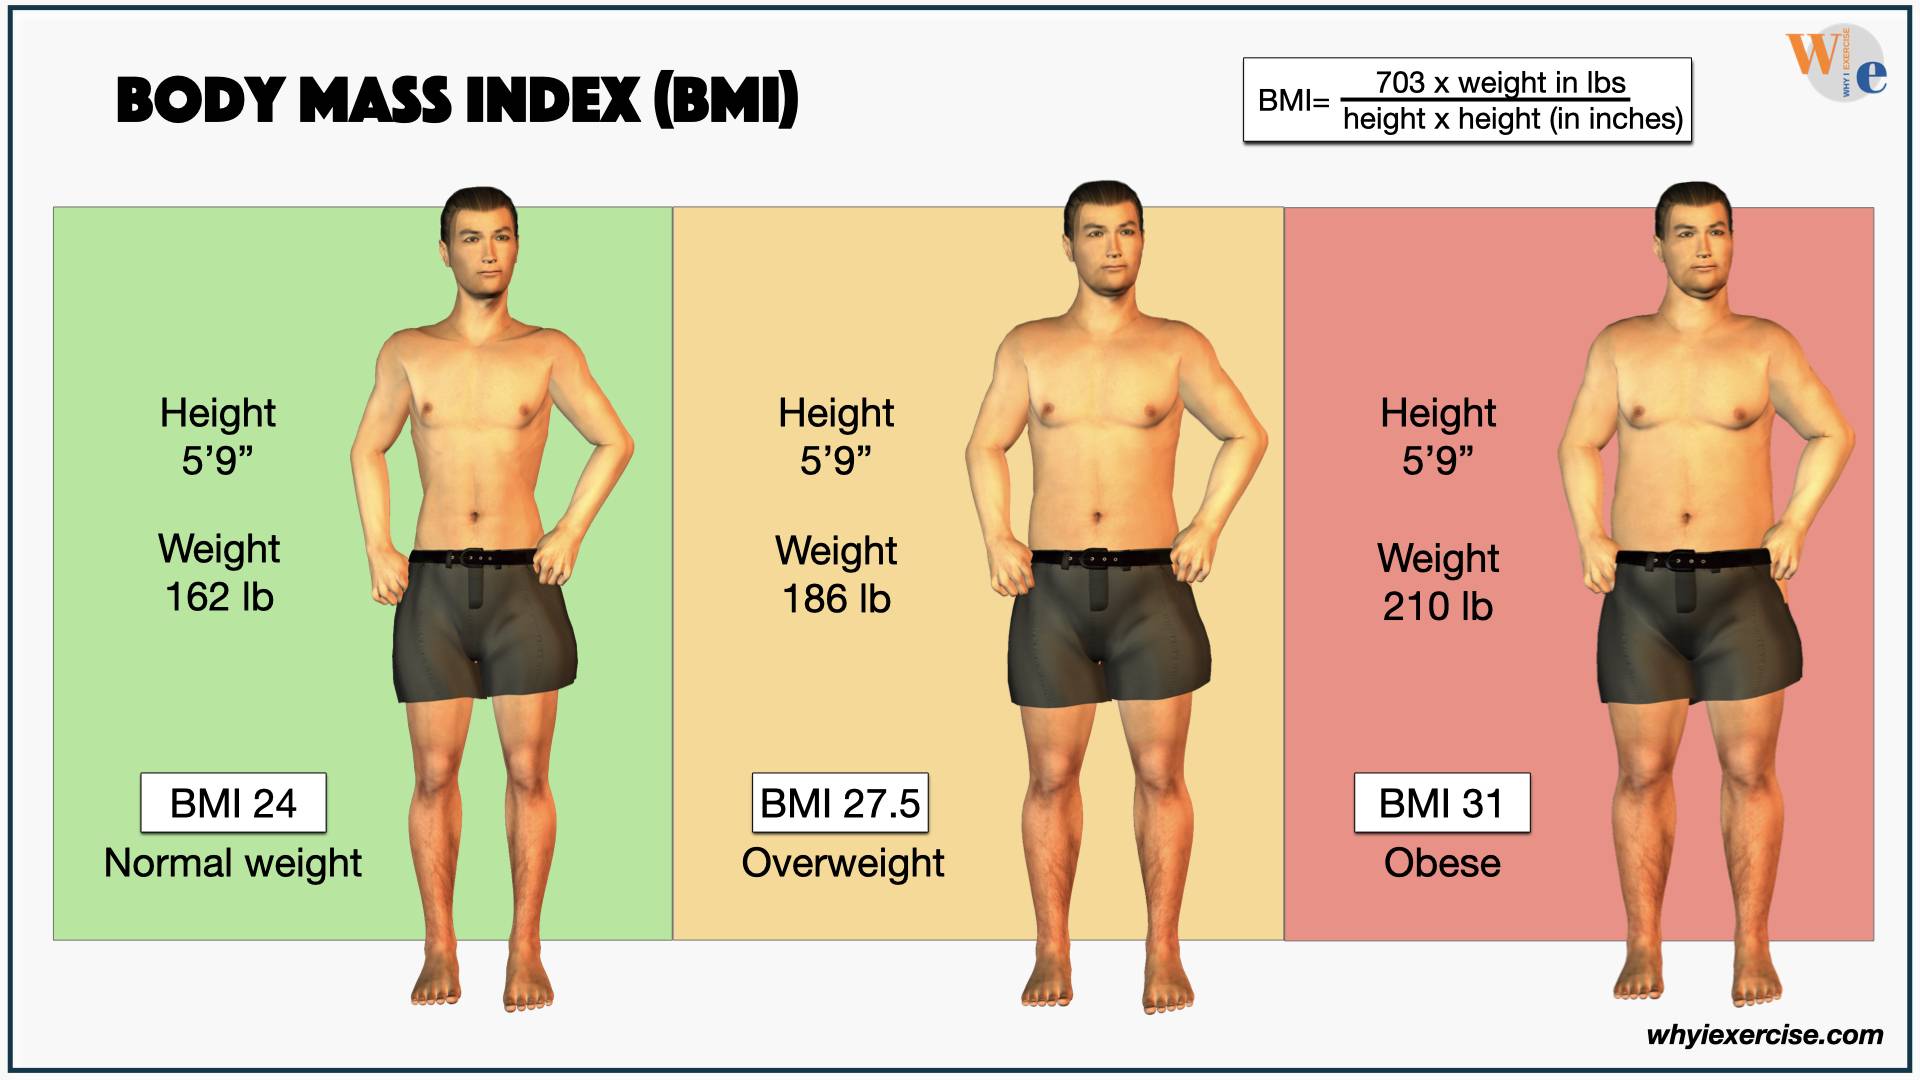 Body Mass Index: Healthy and Unhealthy BMI Values